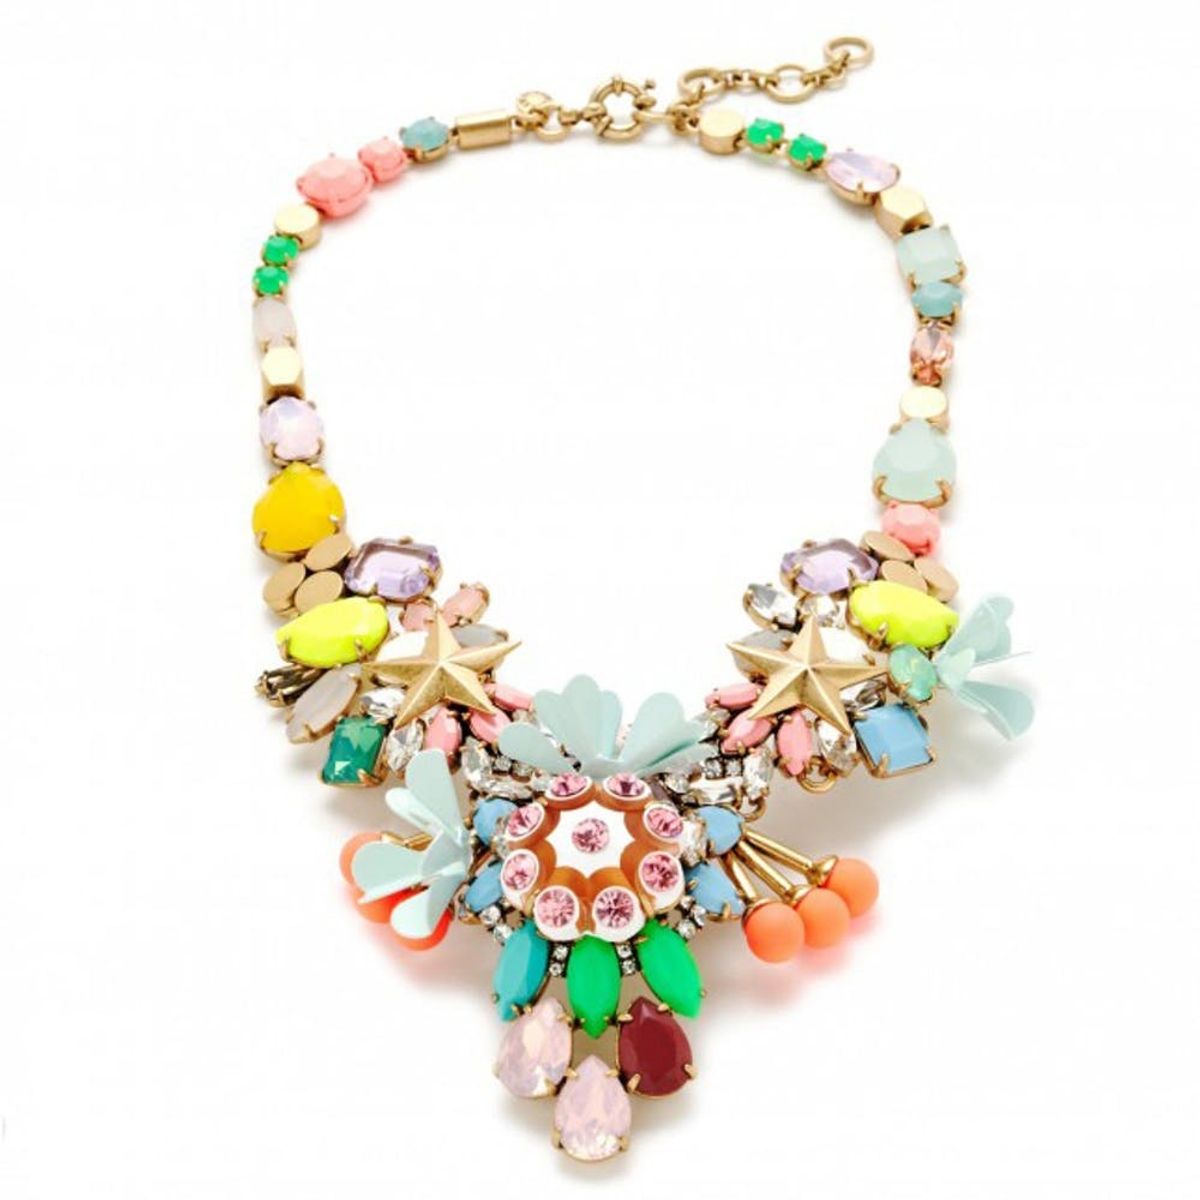 24 Pieces of Jewelry You Need in Your Spring Wardrobe